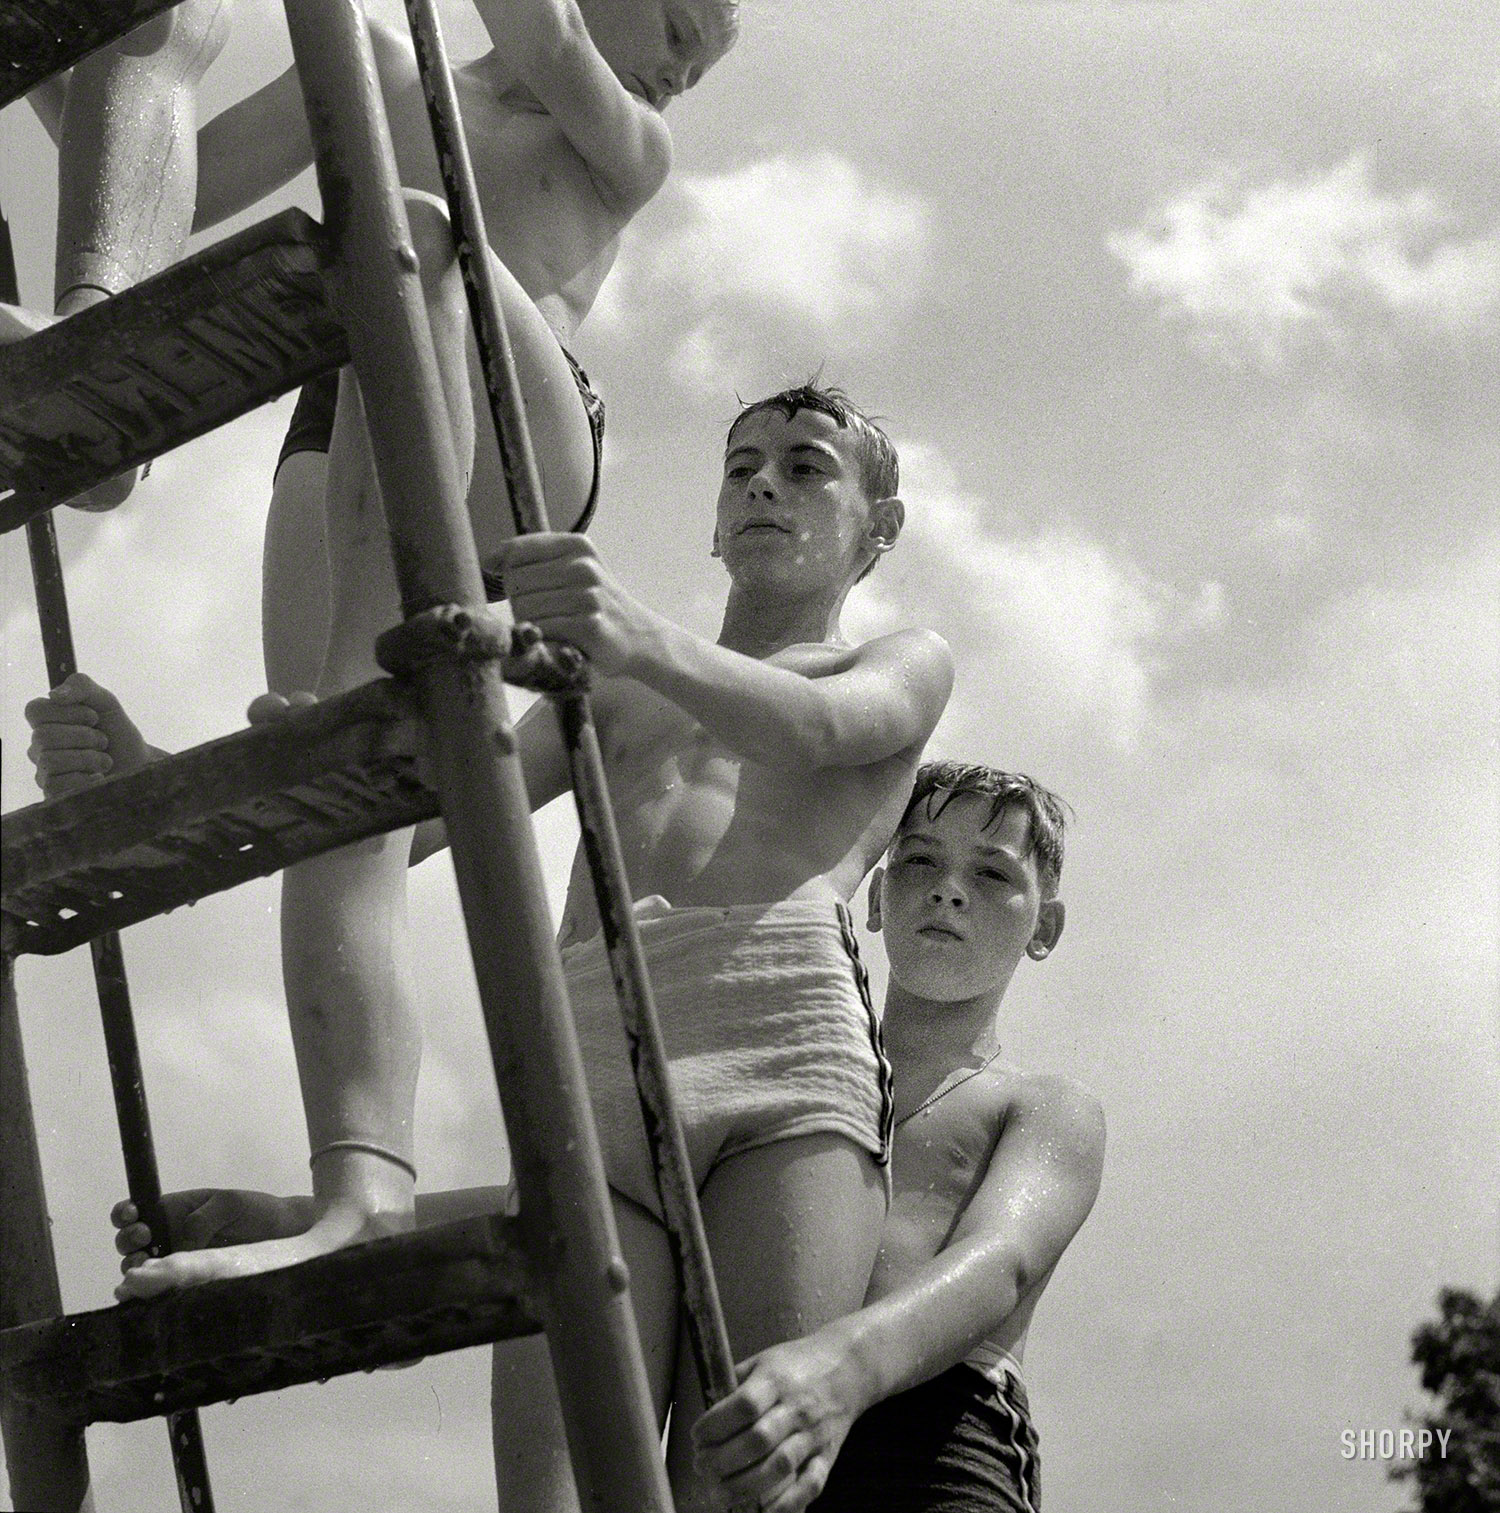 Future Olympic Sliding hopefuls.

July 1943. "Glen Echo, Maryland. Climbing the ladder to the sliding board at the Glen Echo swimming pool." Photo by Esther Bubley. View full size.
